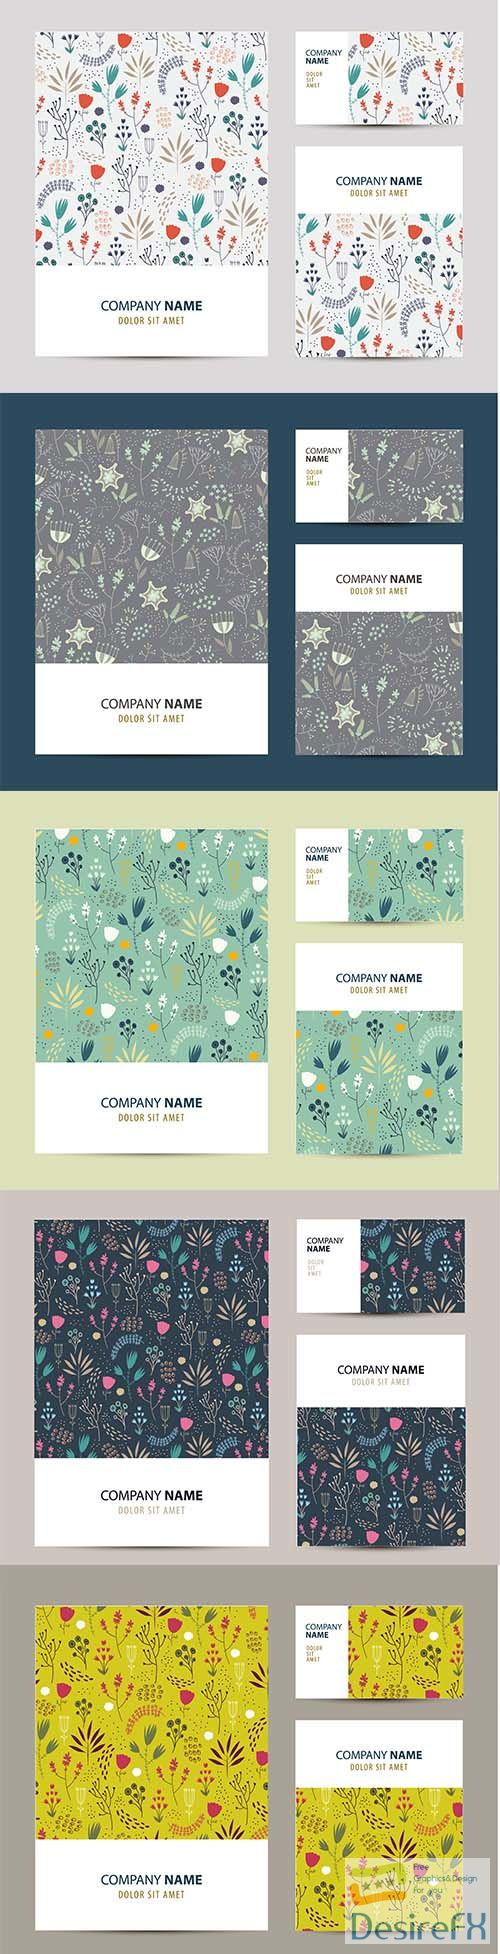 Business set template with hand-drawn flower pattern